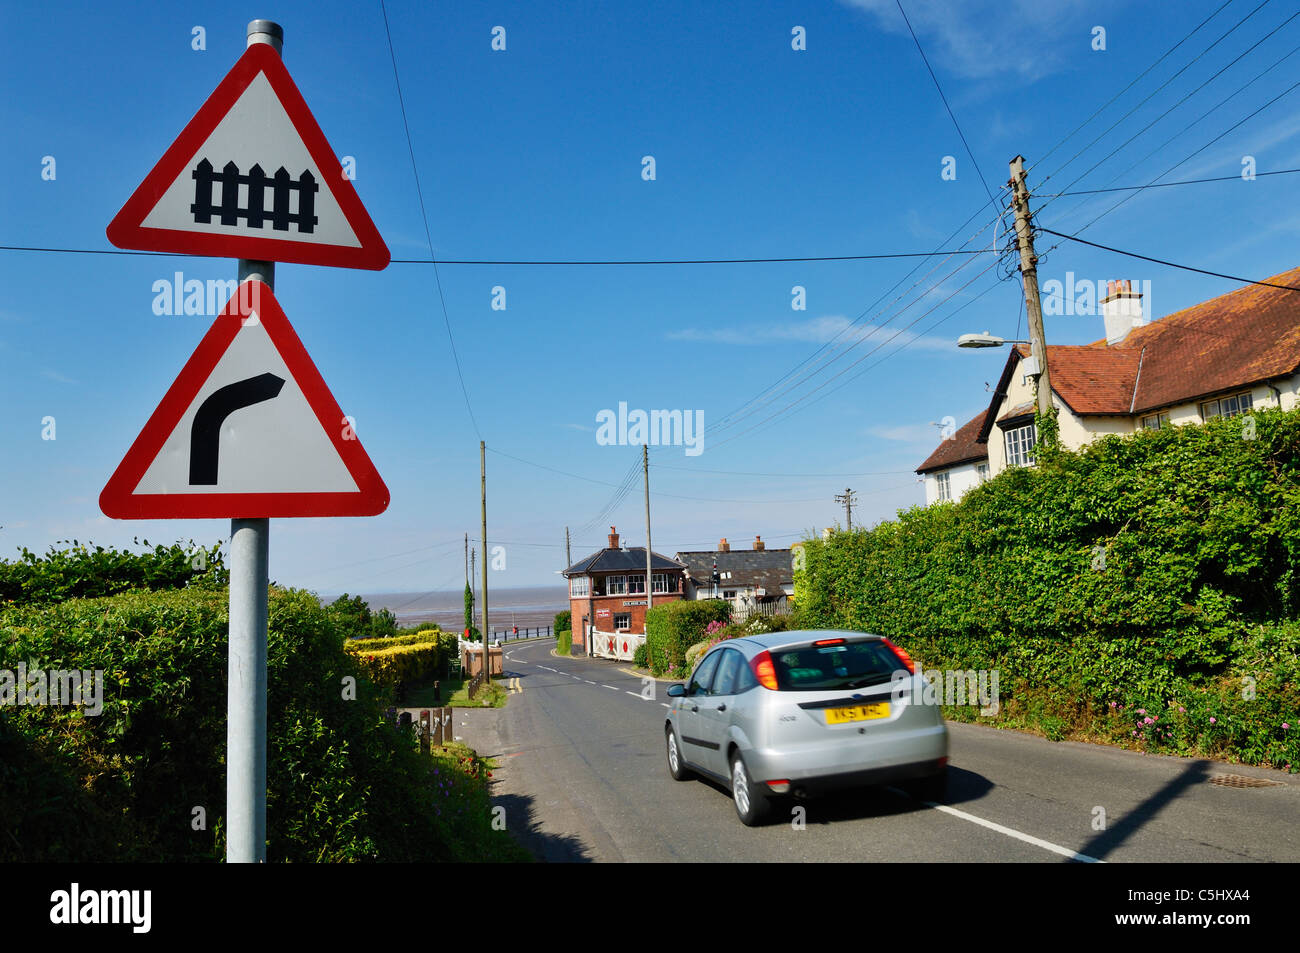 Warning road signs on the approach to the level crossing at Blue Anchor, Somerset, England. Stock Photo